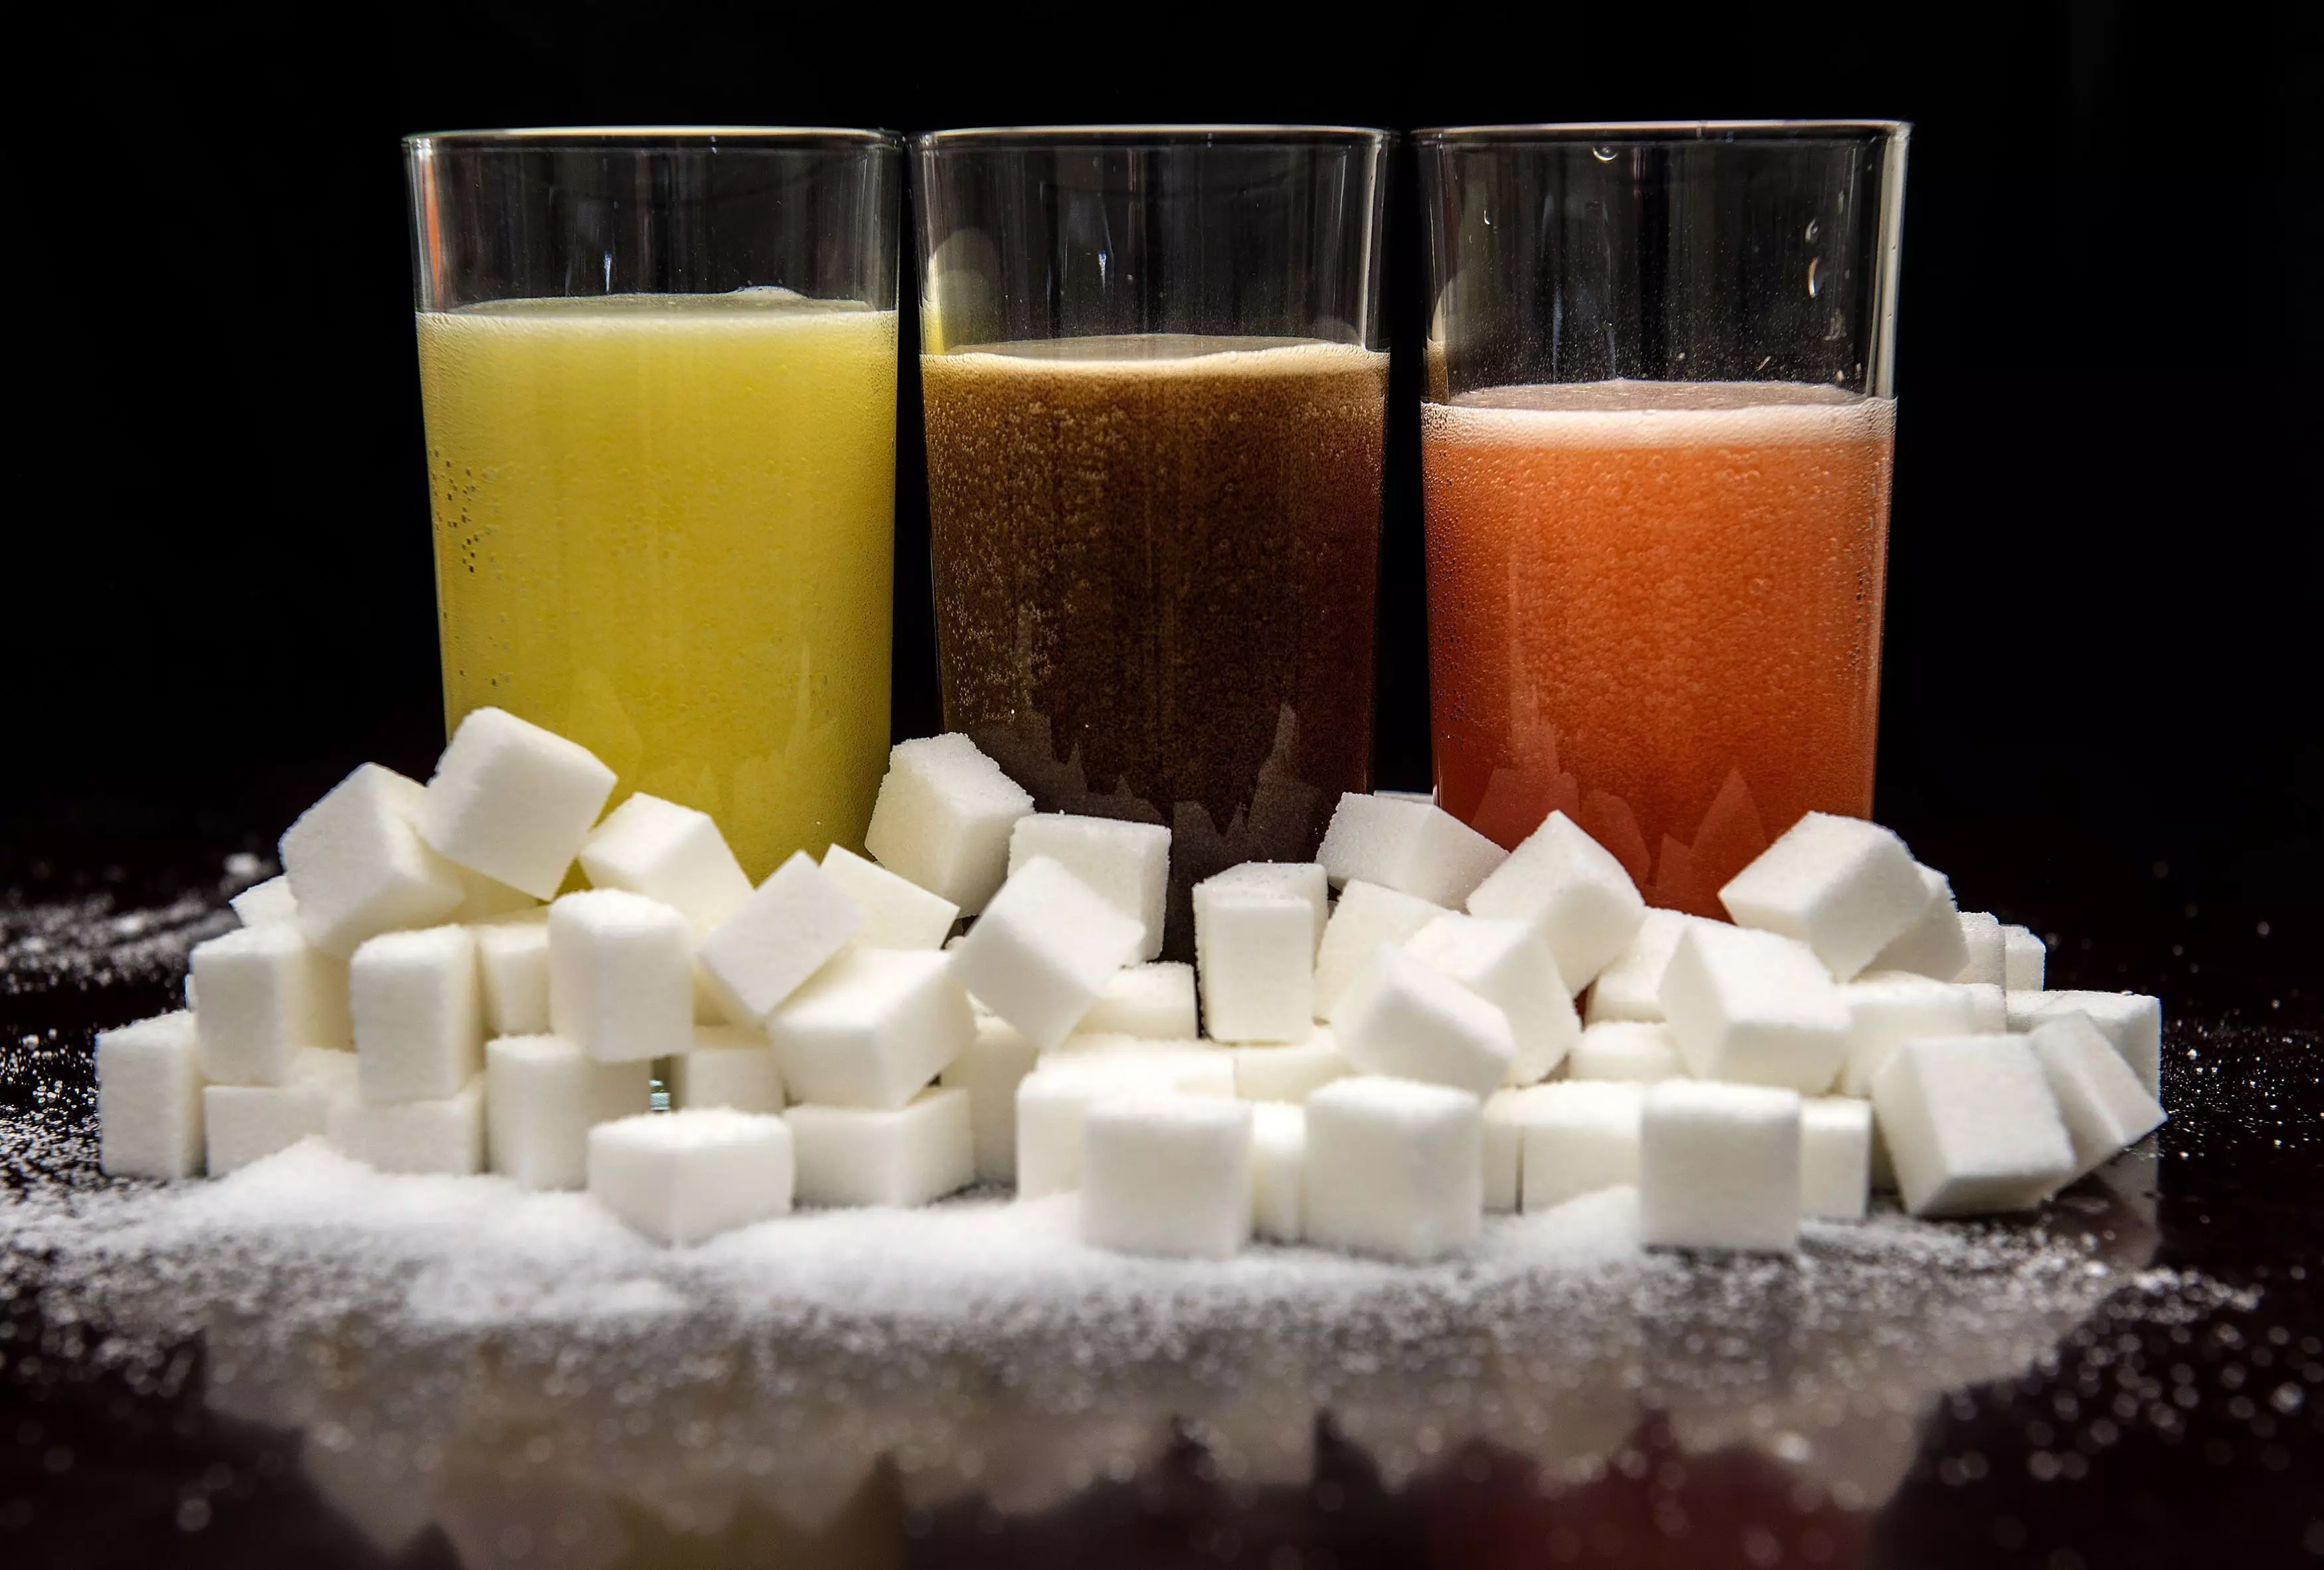 Sugary drinks are a major factor.